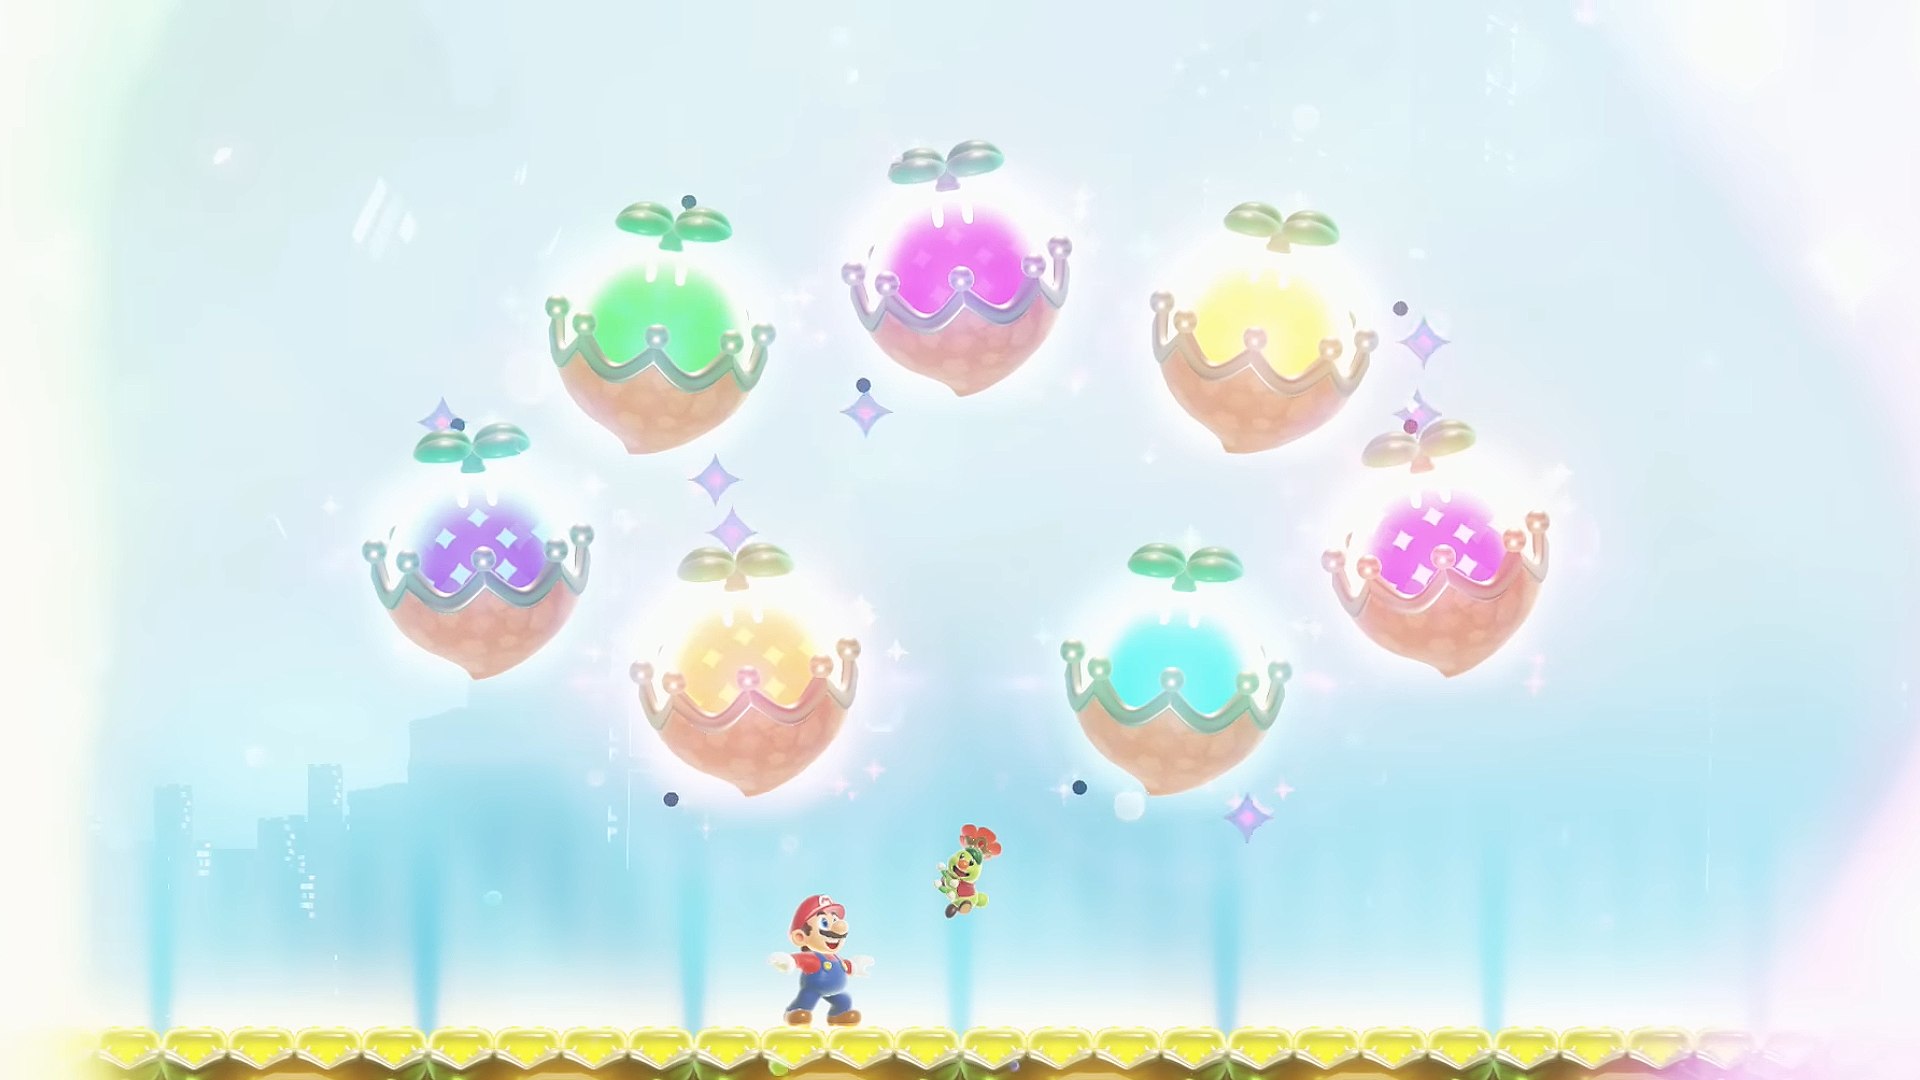 the royal wonder seeds appearing at the end of Super Mario Bros. Wonder